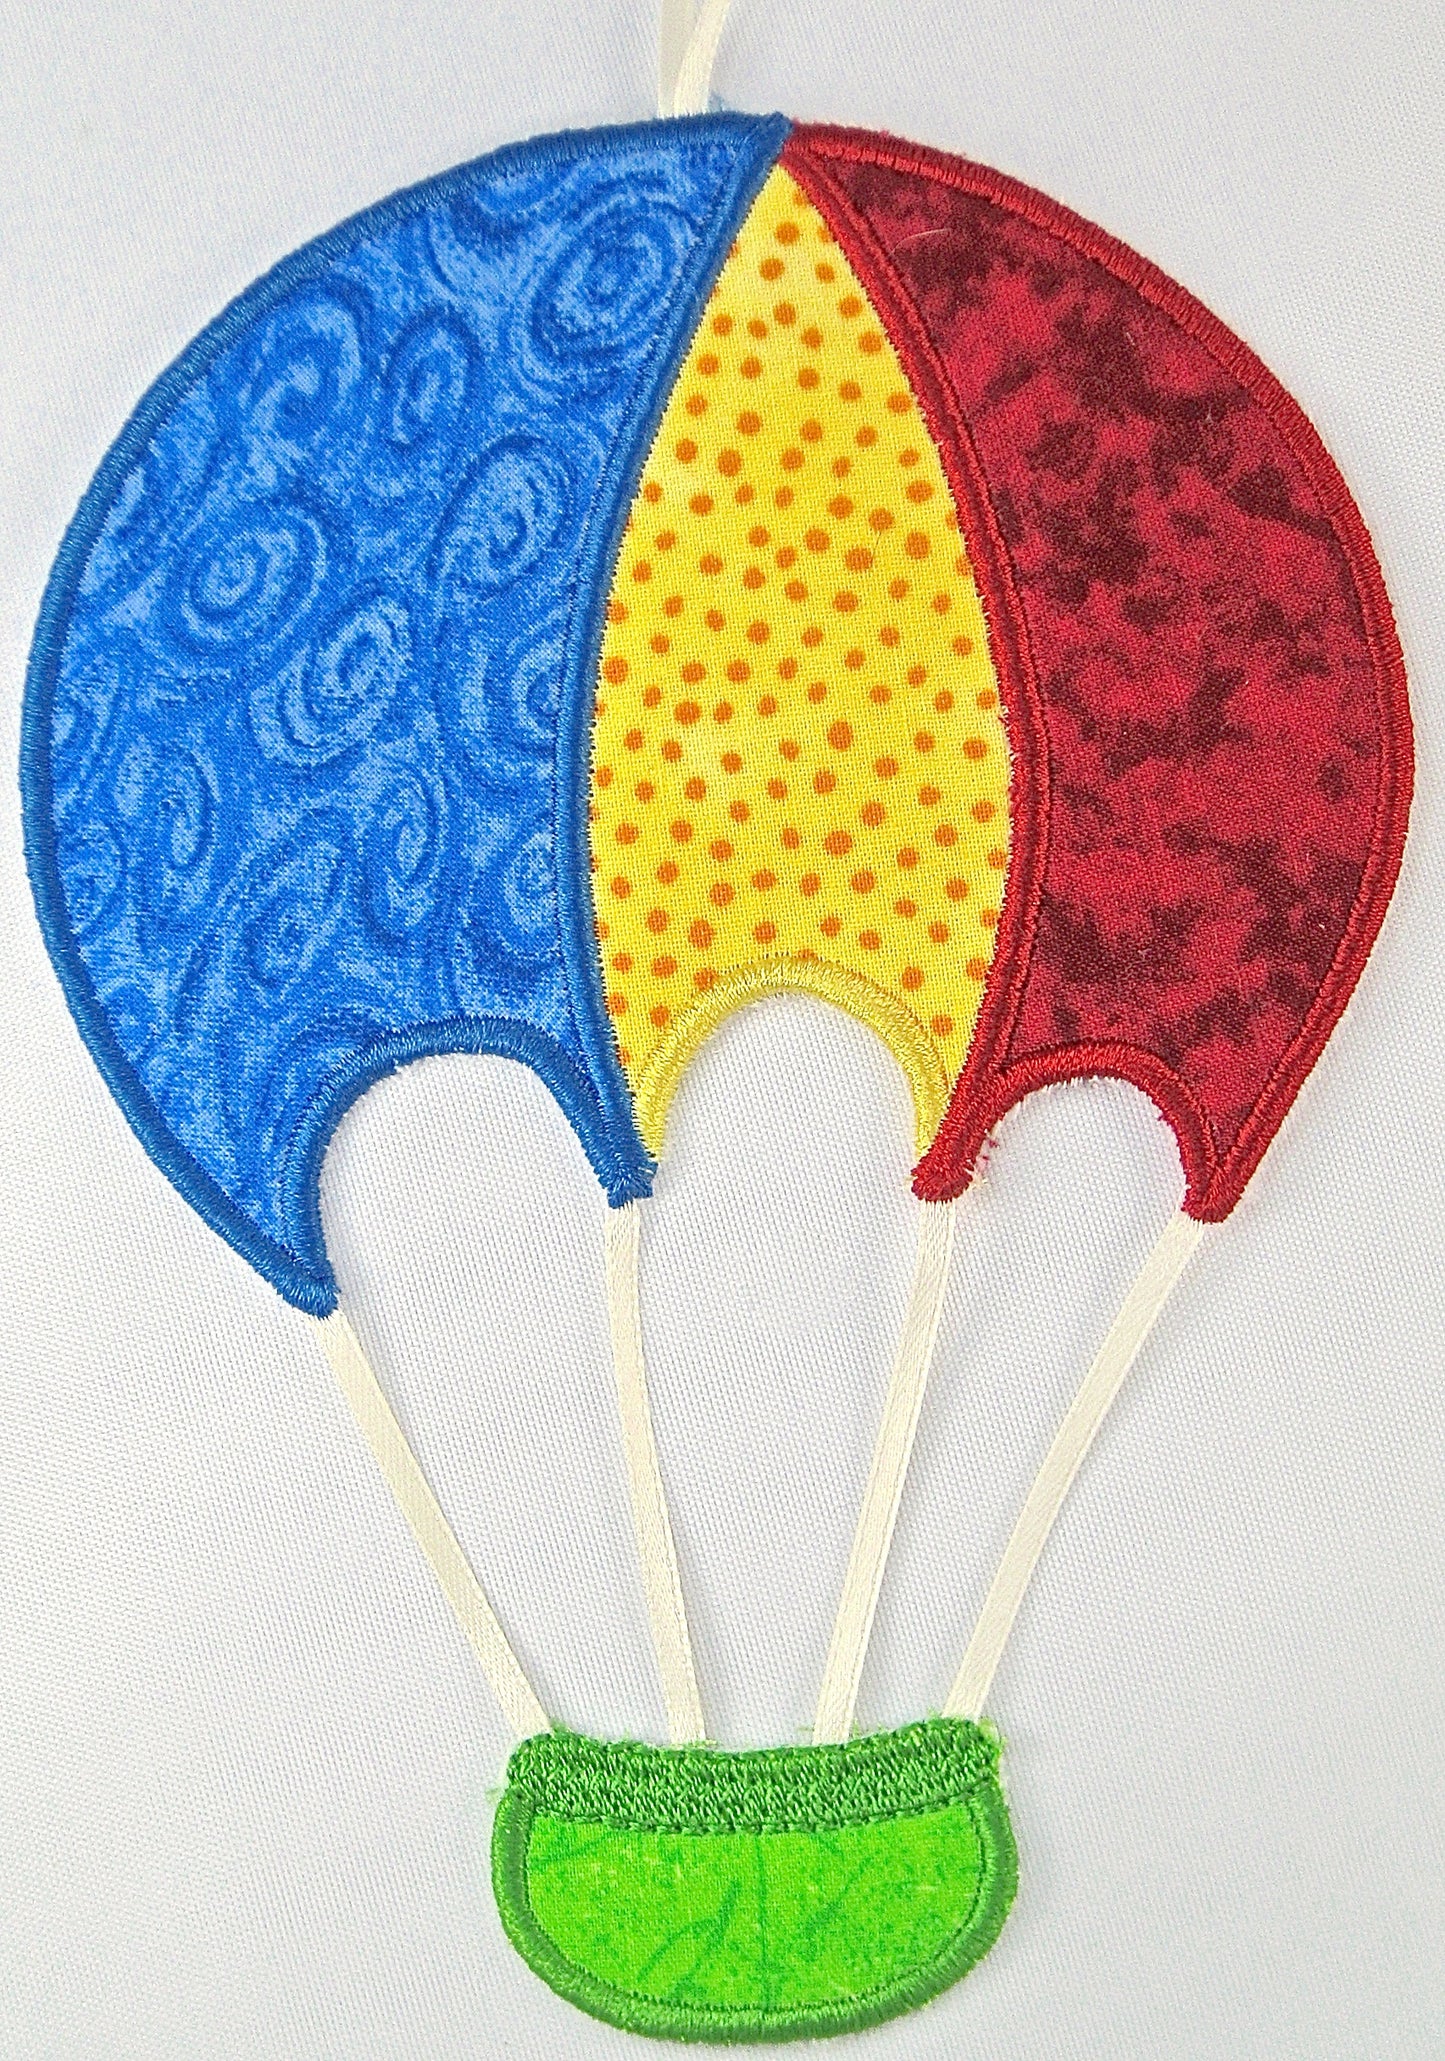 ITH Patchy Hot Air Balloons-1  [5x7] #  10524